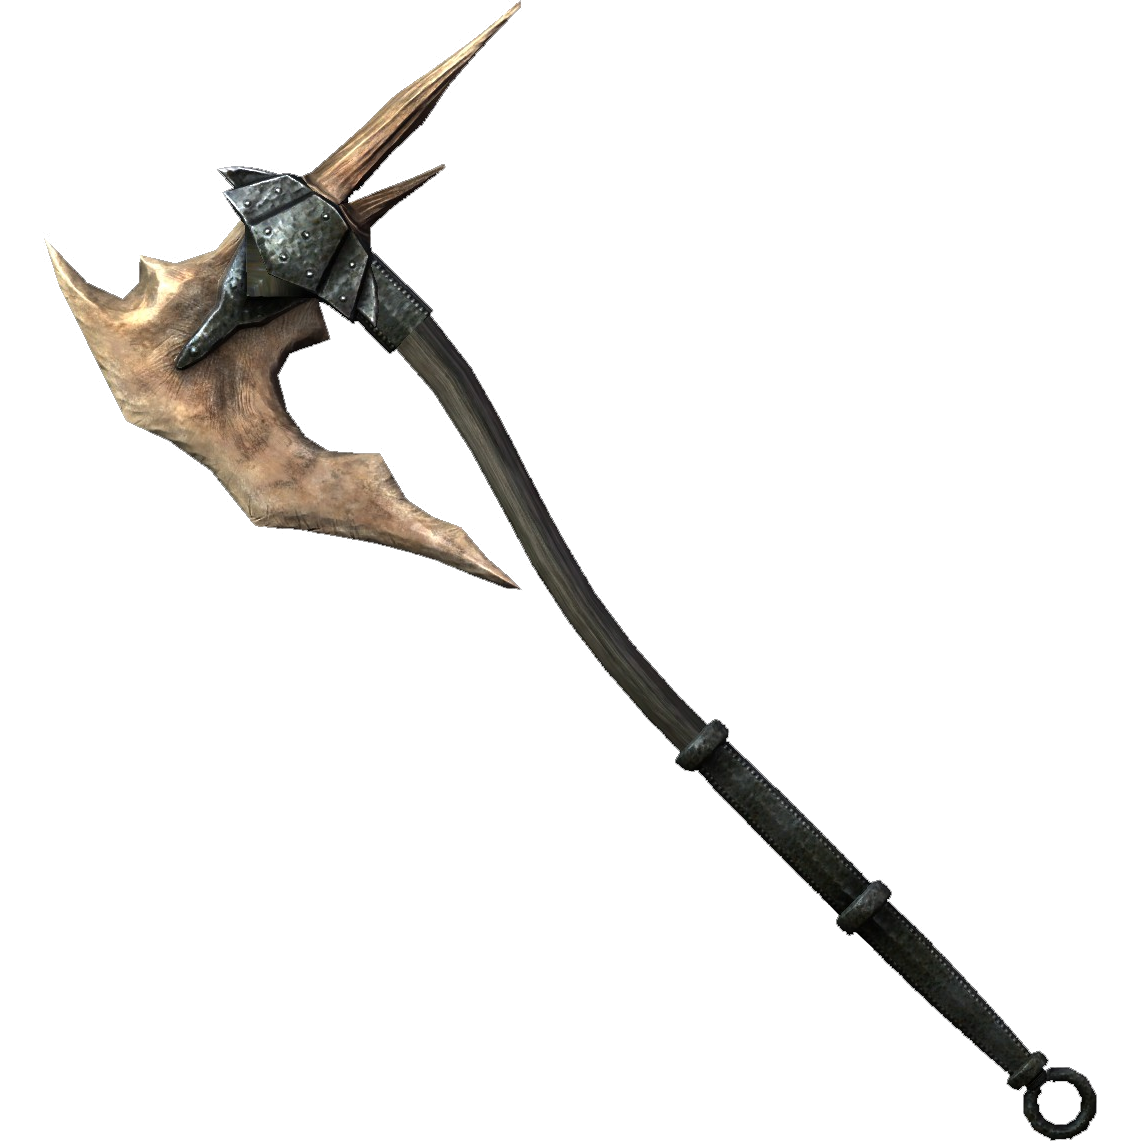 skyrim special edition weapons